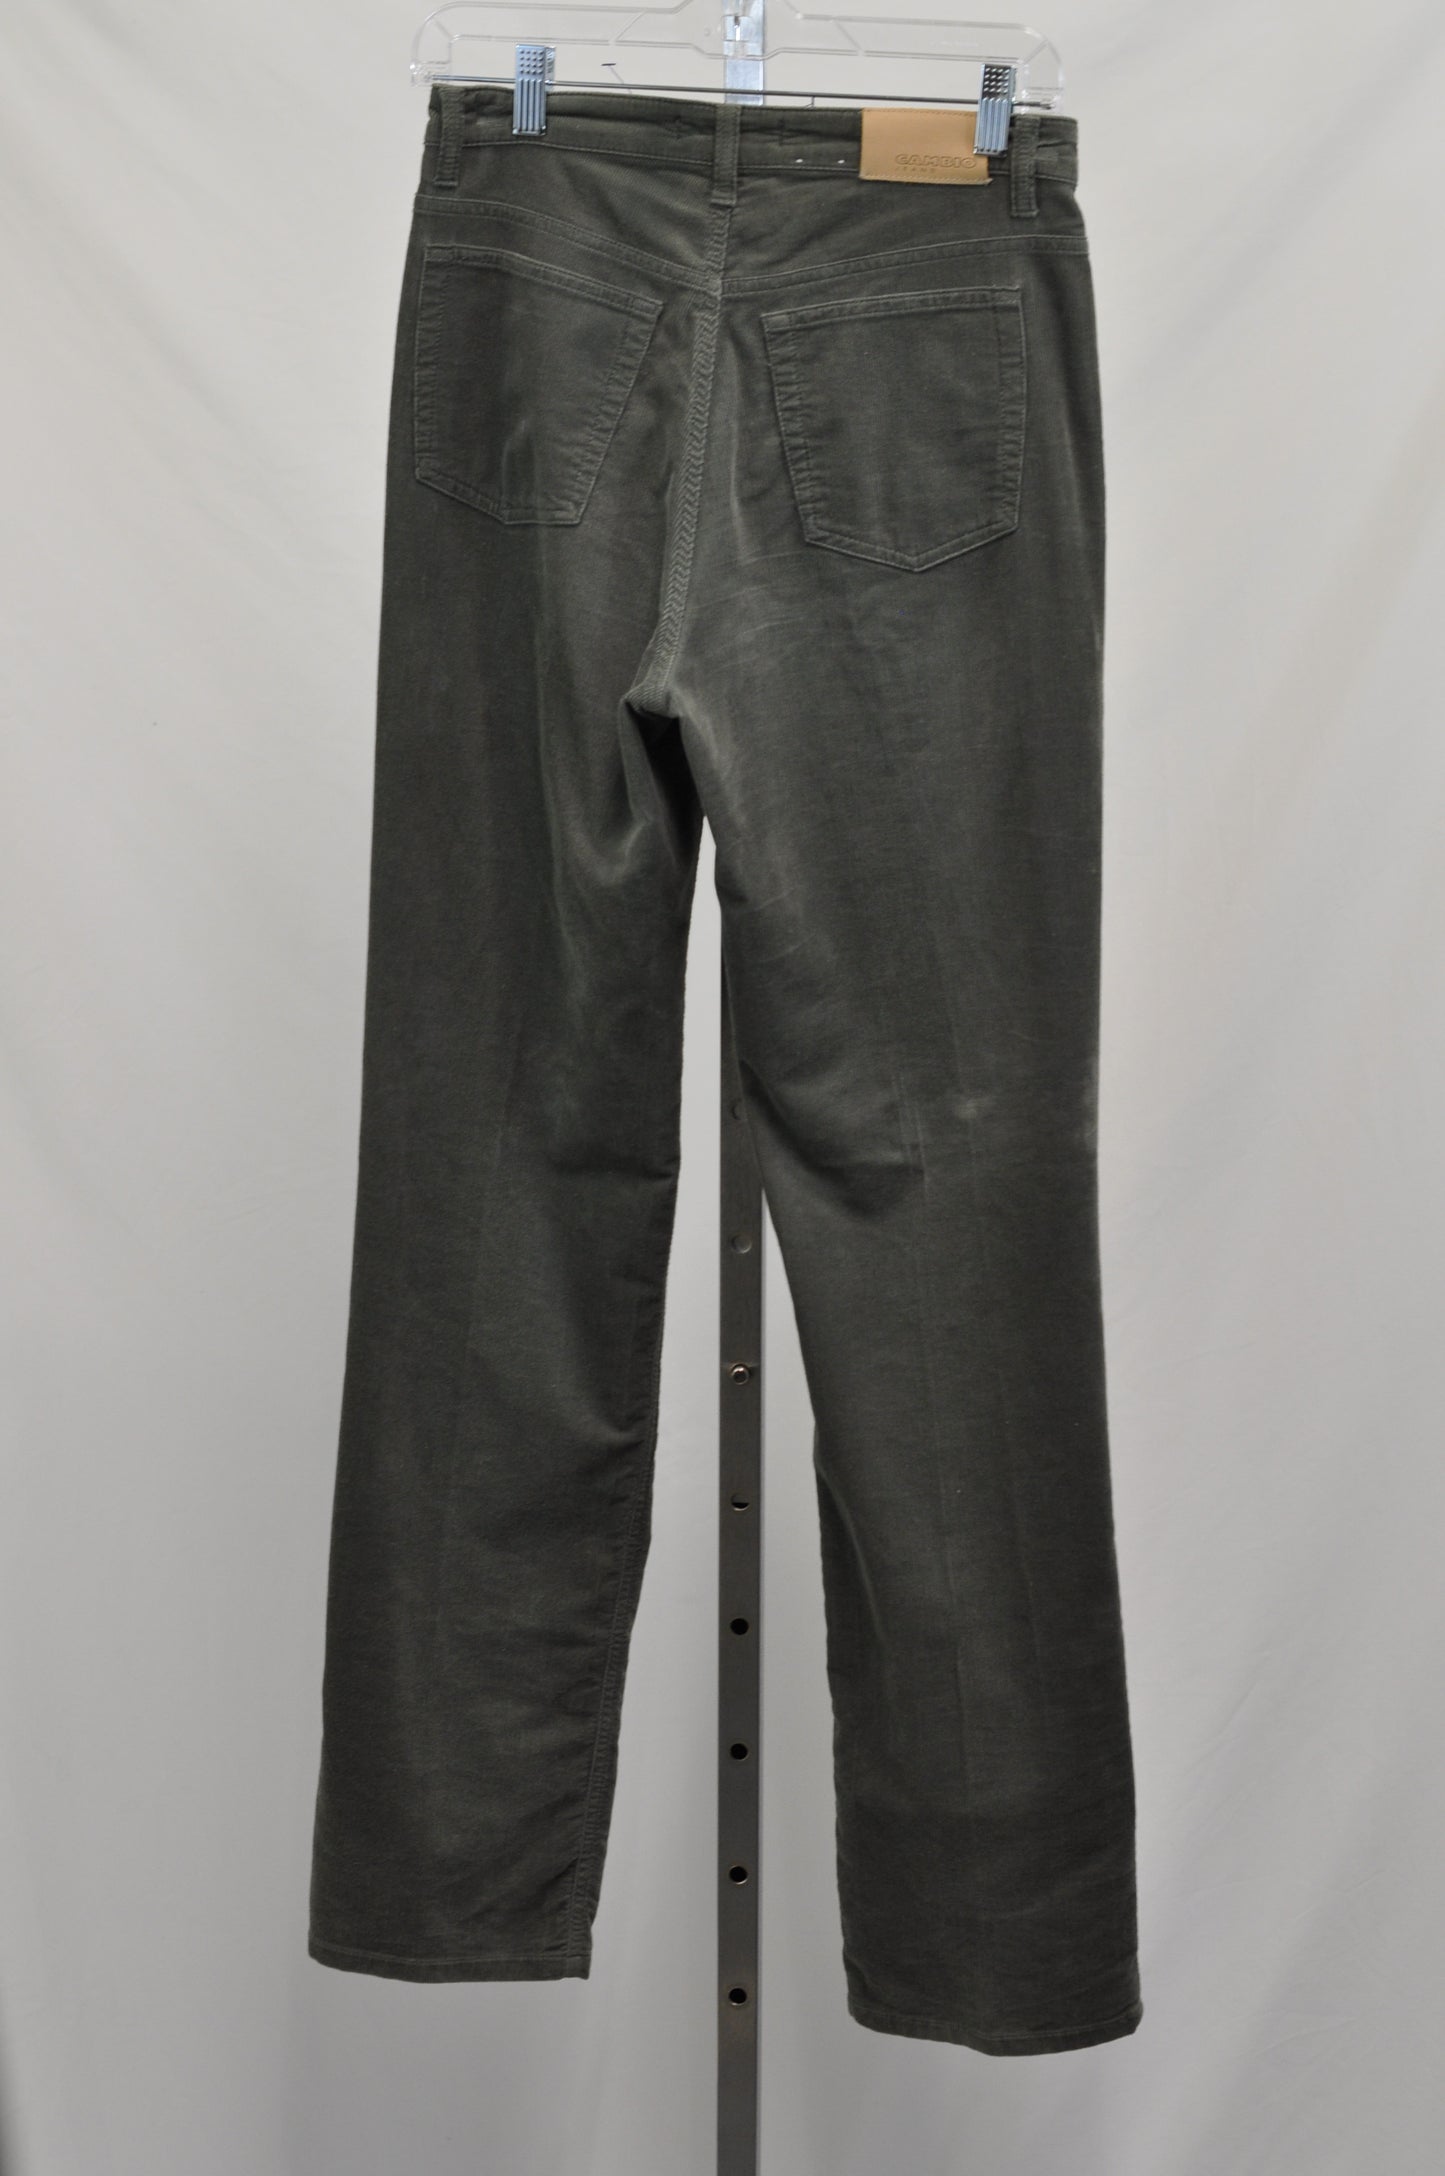 Cambio Jeans Olive Corduroy Pants - Size 6